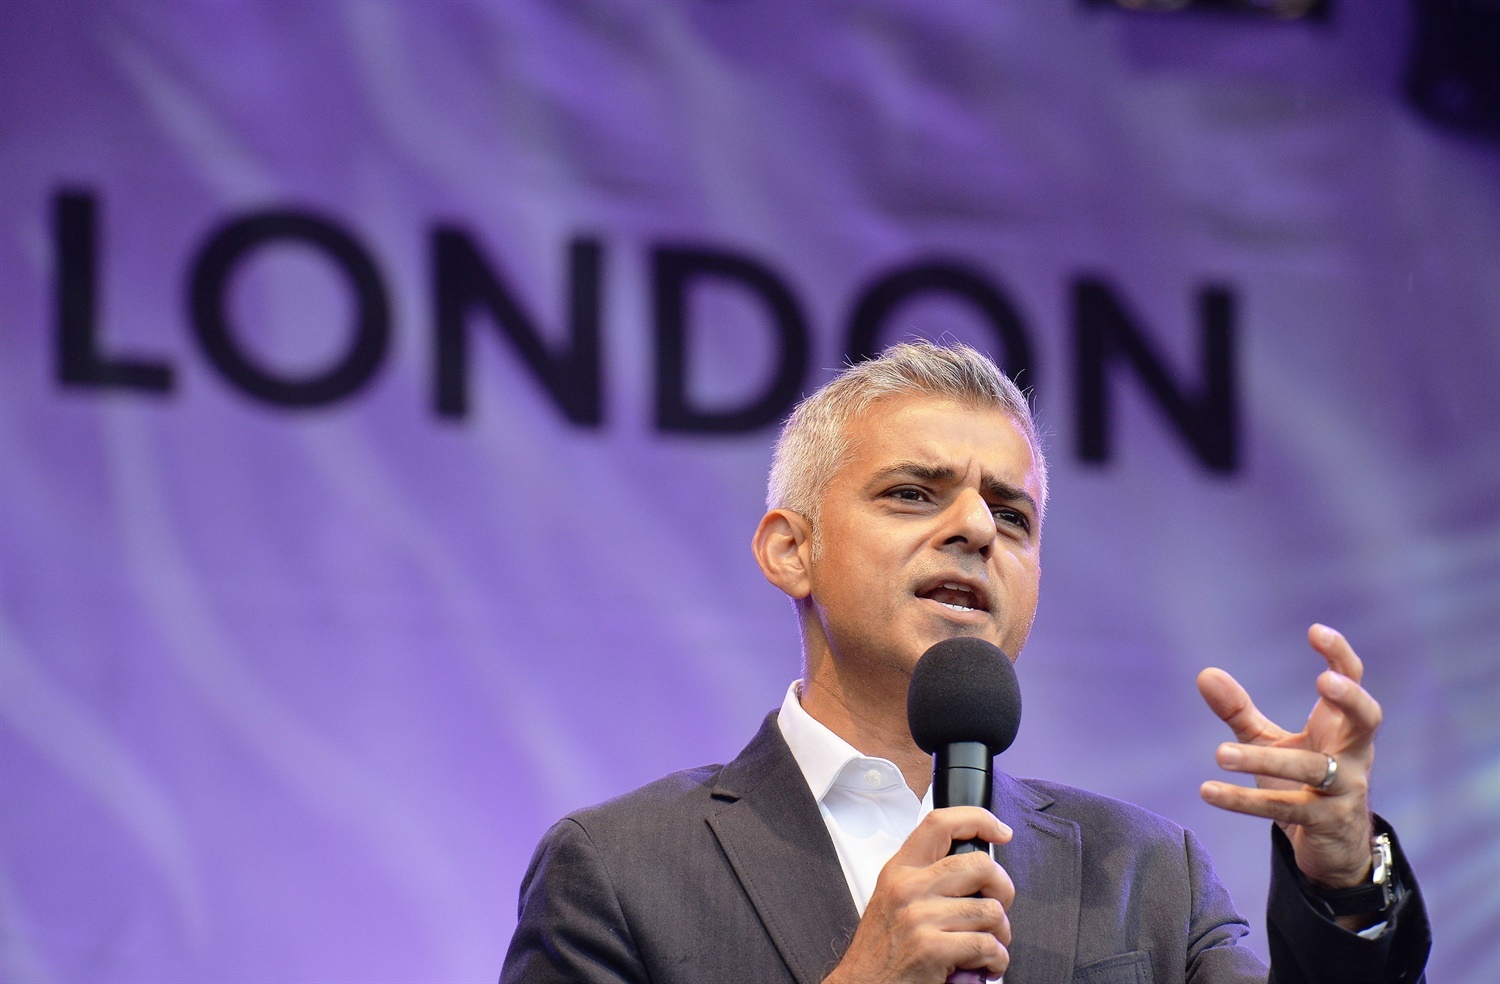 Khan calls for DfT to freeze London rail fares to avoid 5% price rise